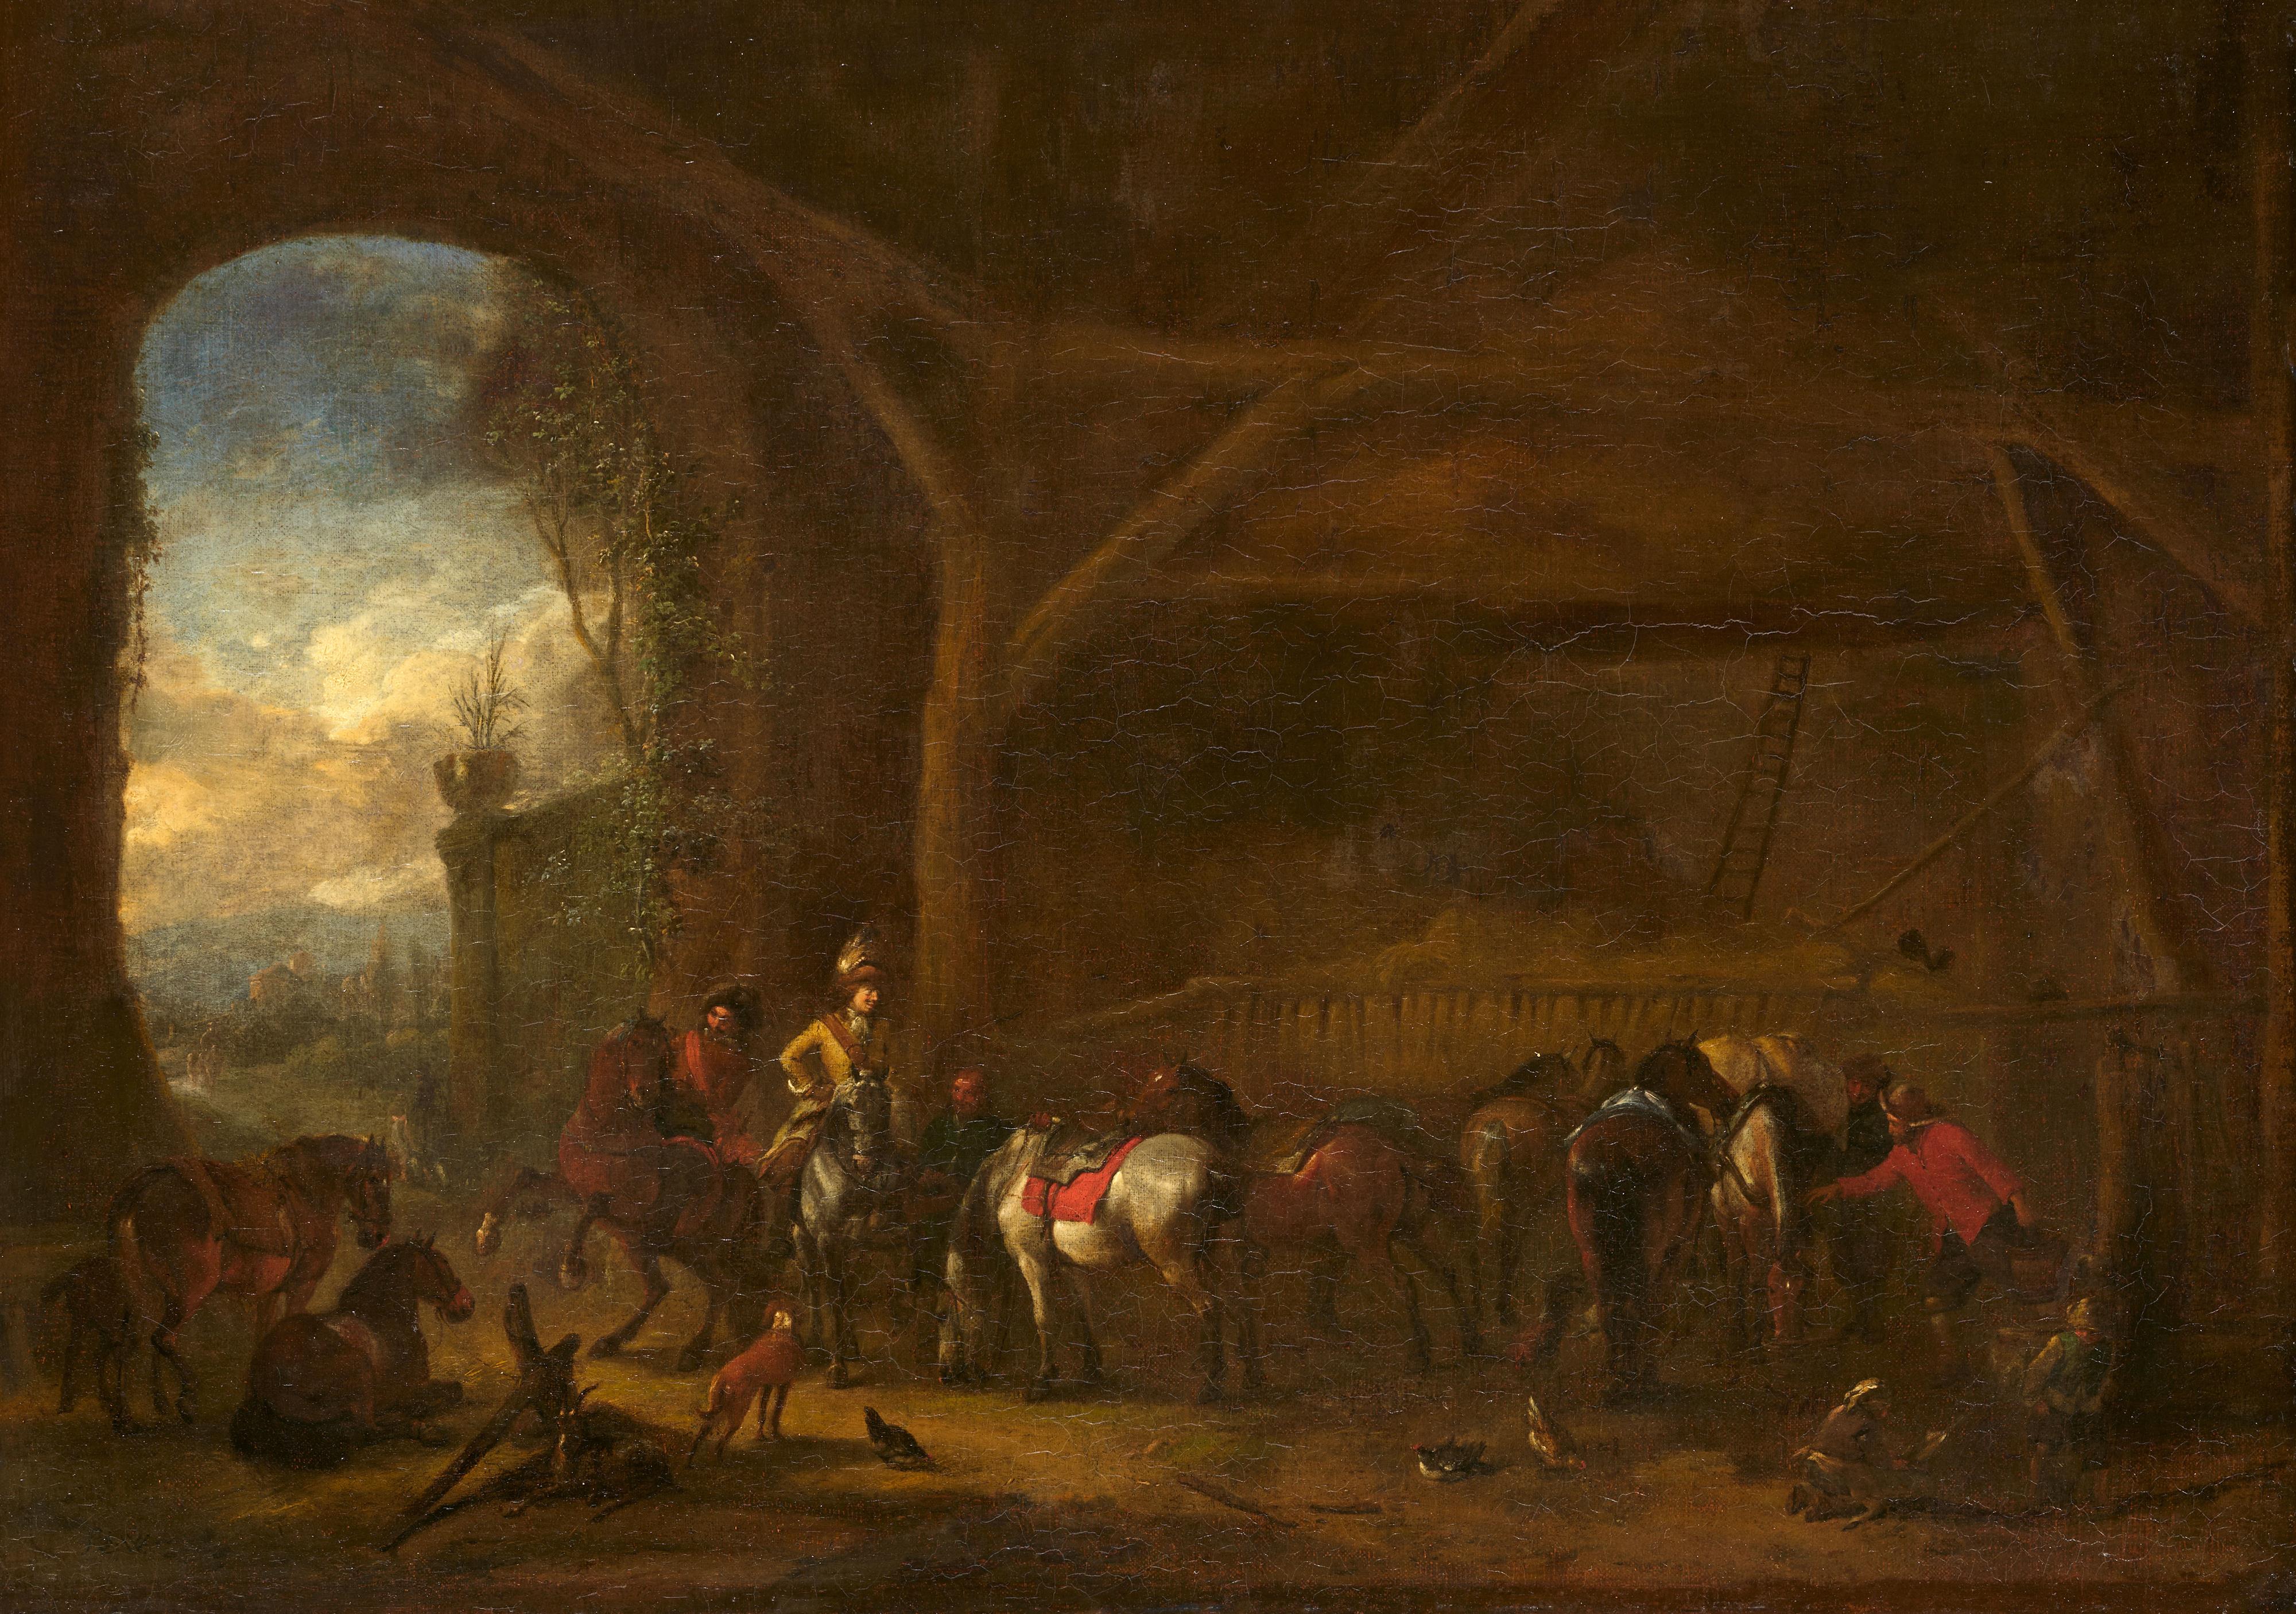 Philips Wouwerman - Stable Interior with Horsemen and Horses - image-1